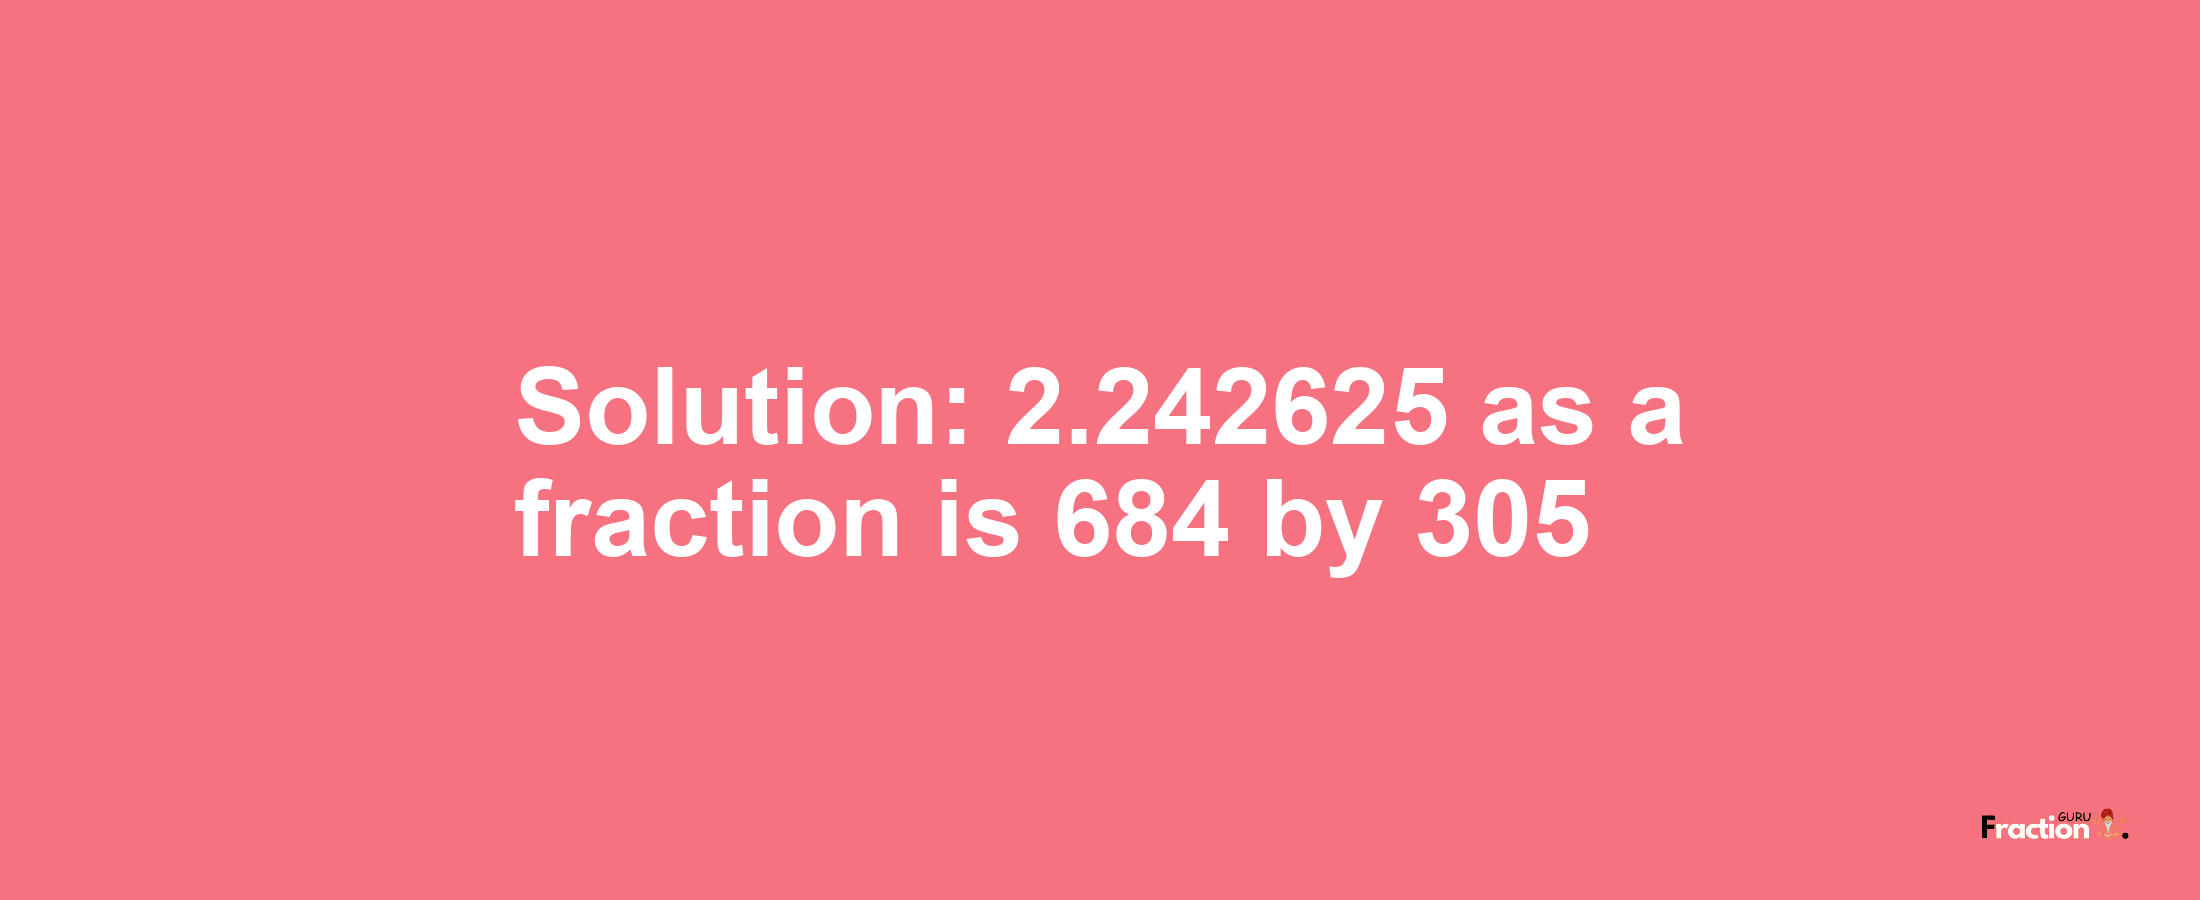 Solution:2.242625 as a fraction is 684/305